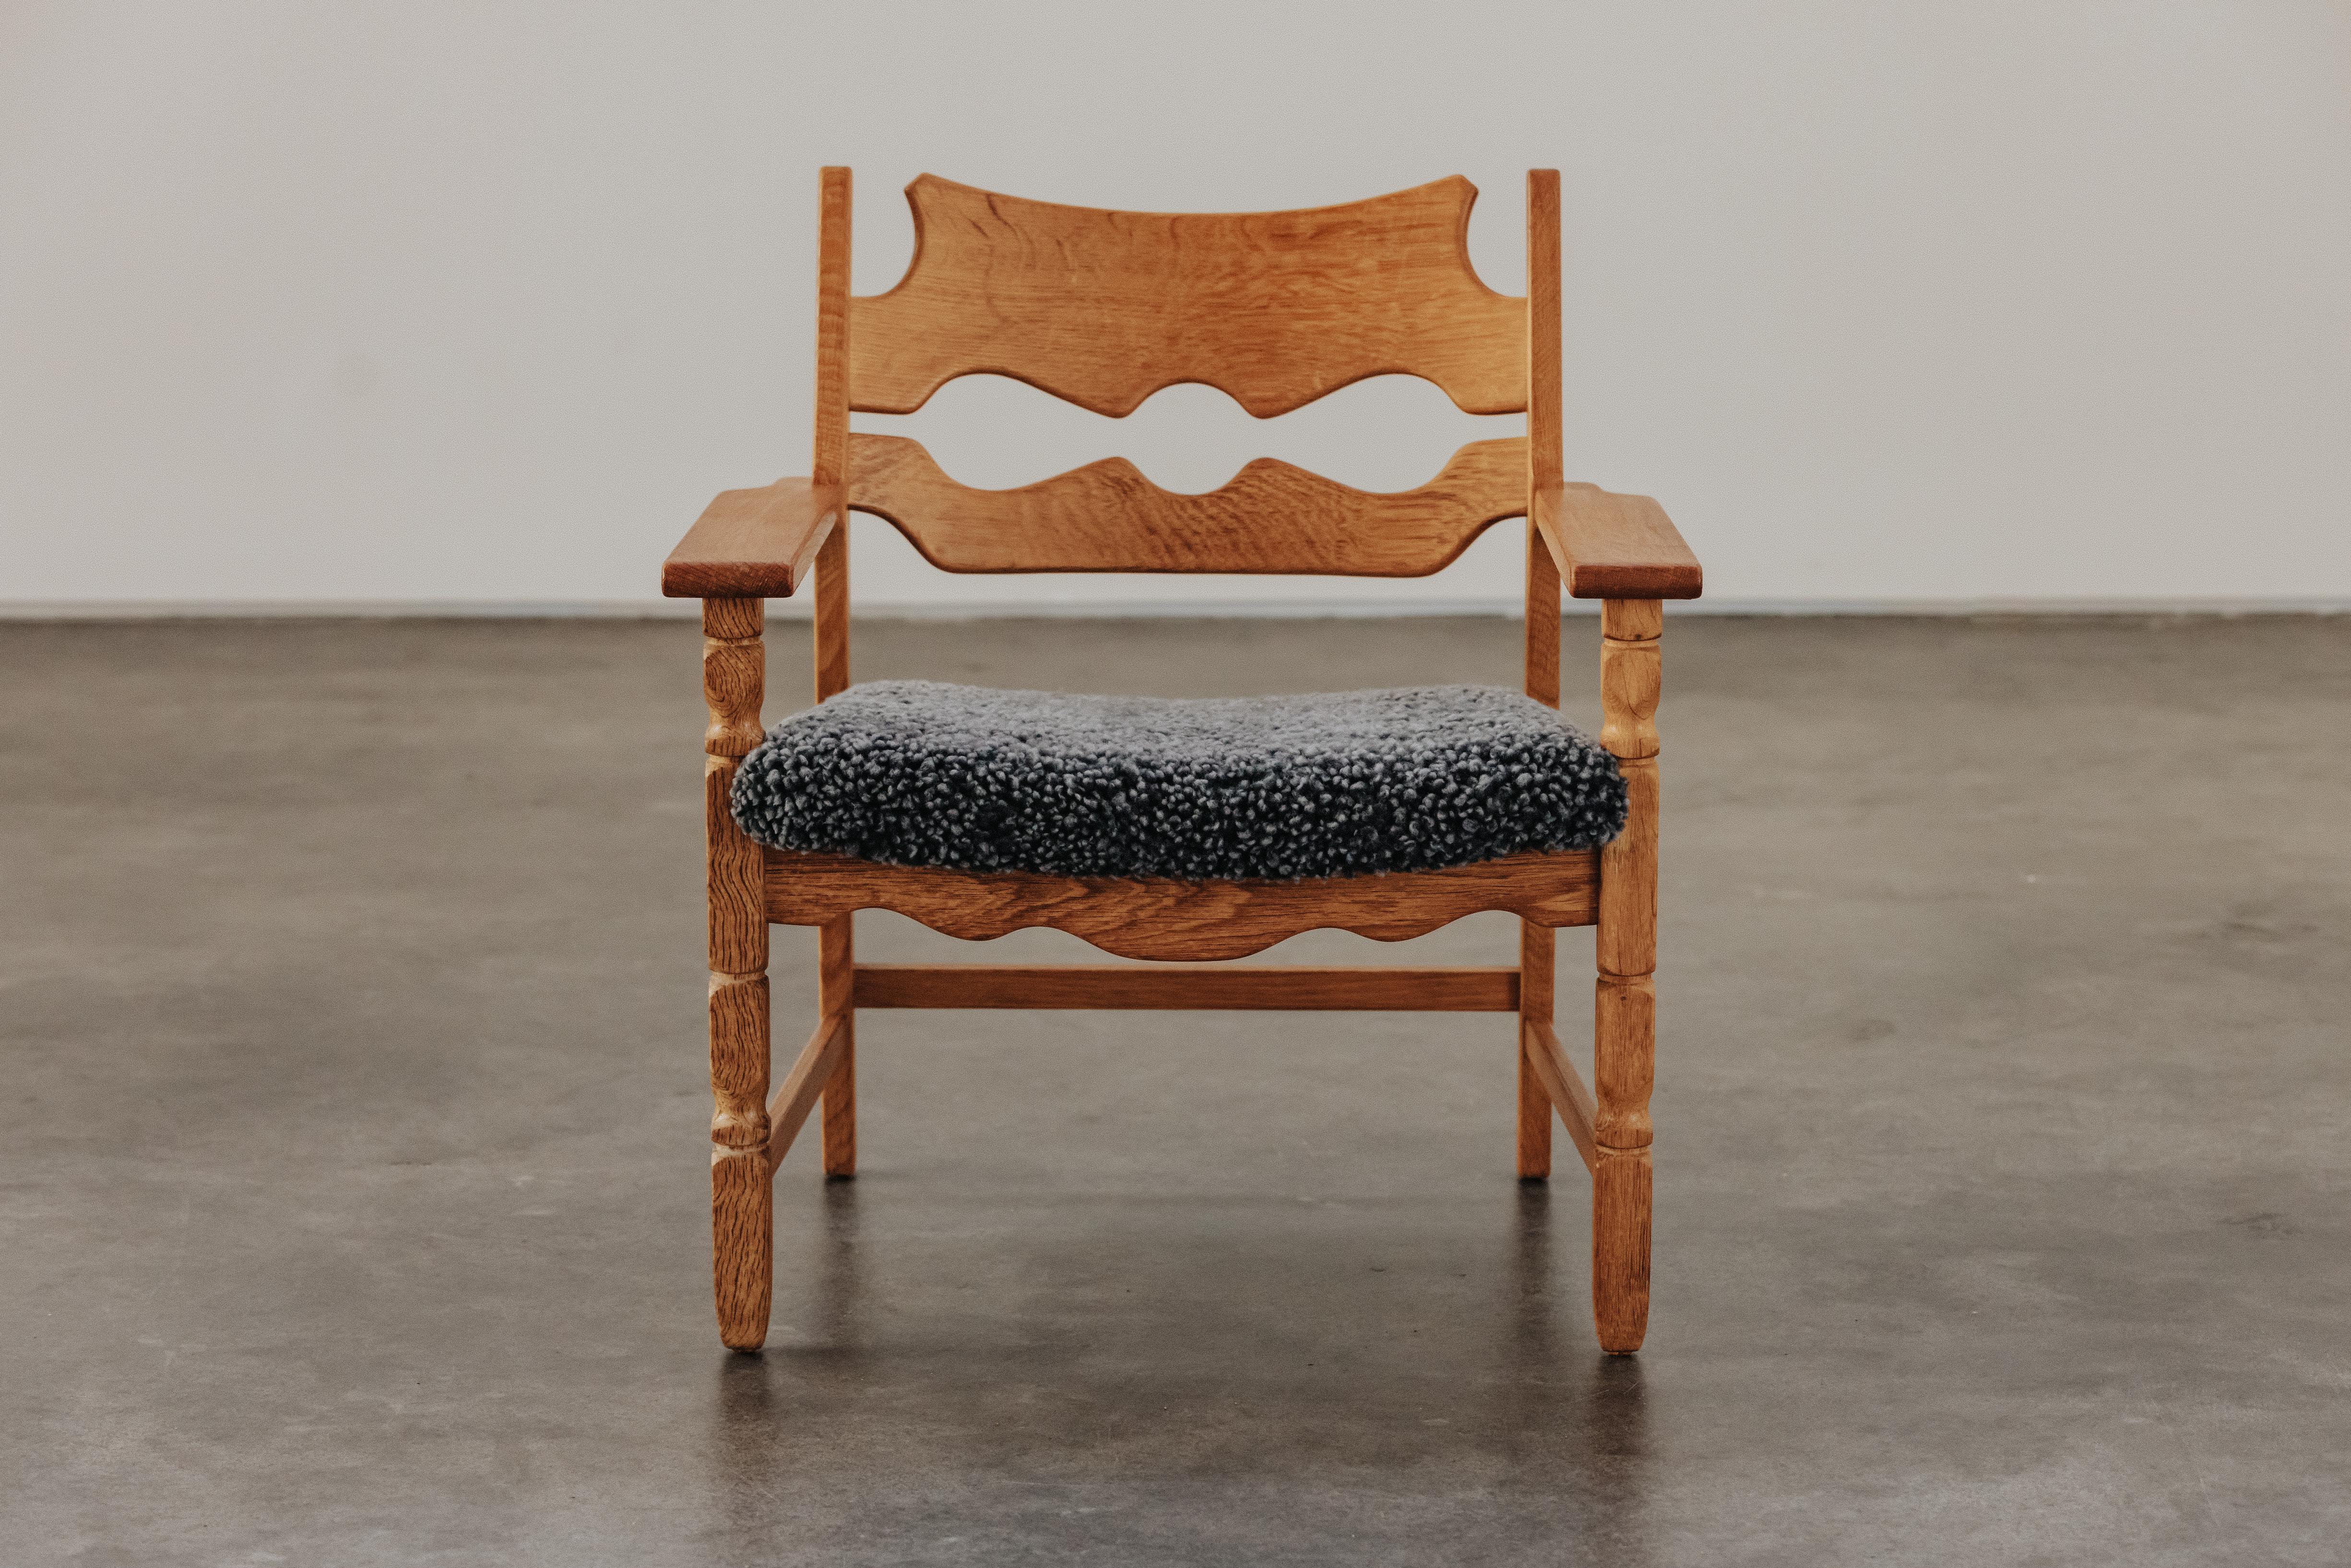 Vintage Henning Kjaernulf Razor Lounge Chair From Denmark, Circa 1960.  Solid oak construction, later upholstered in very soft sheepskin.  Light wear and use.  